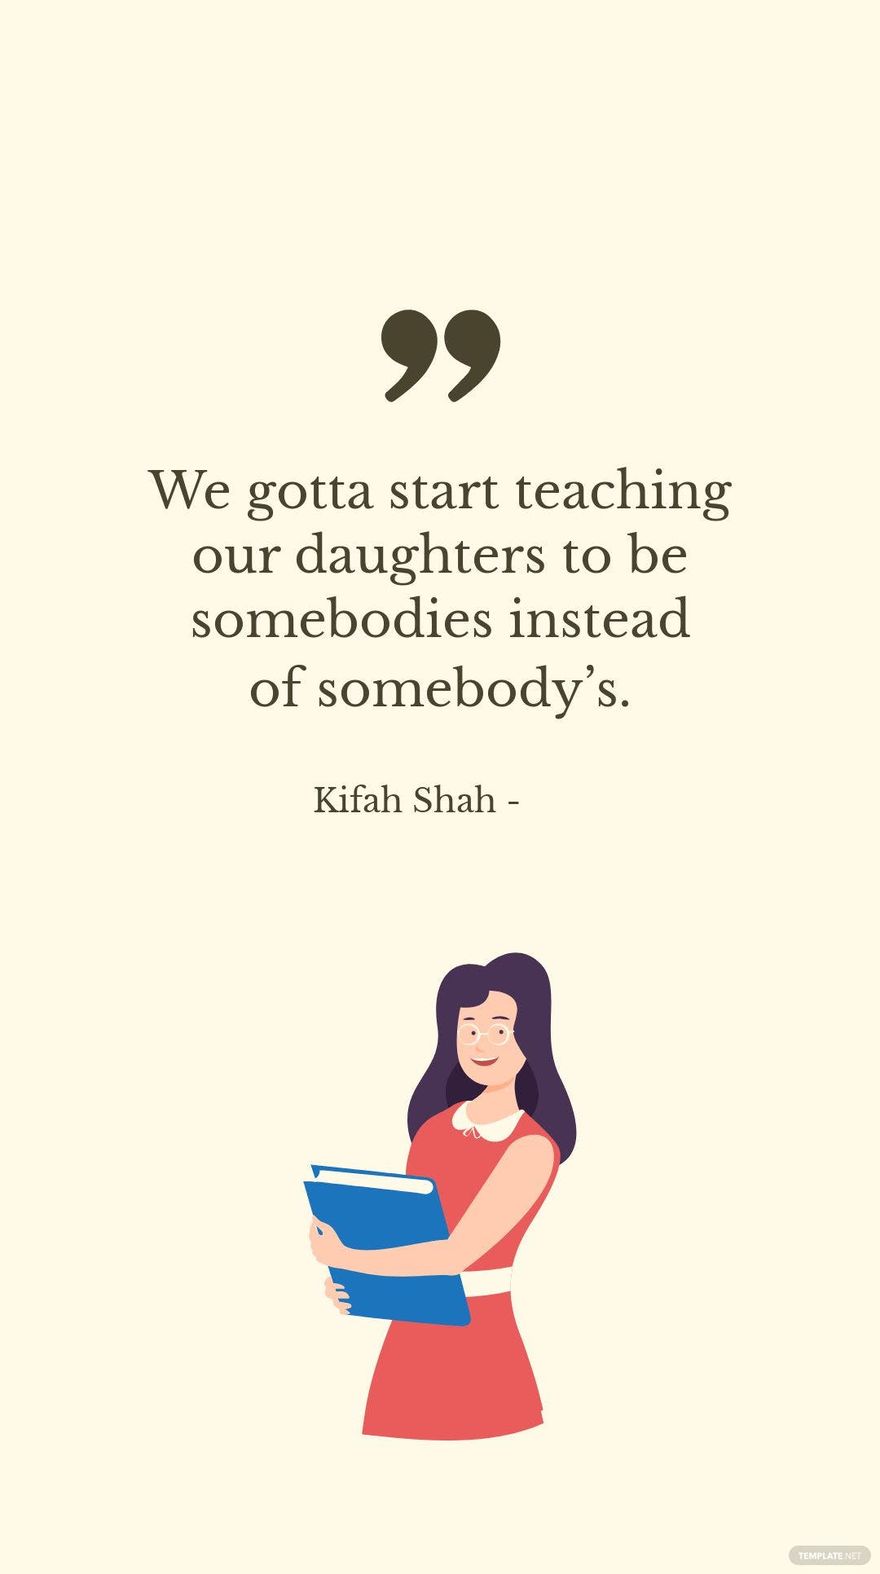 KIFAH SHAH - We gotta start teaching our daughters to be somebodies instead of somebody’s.